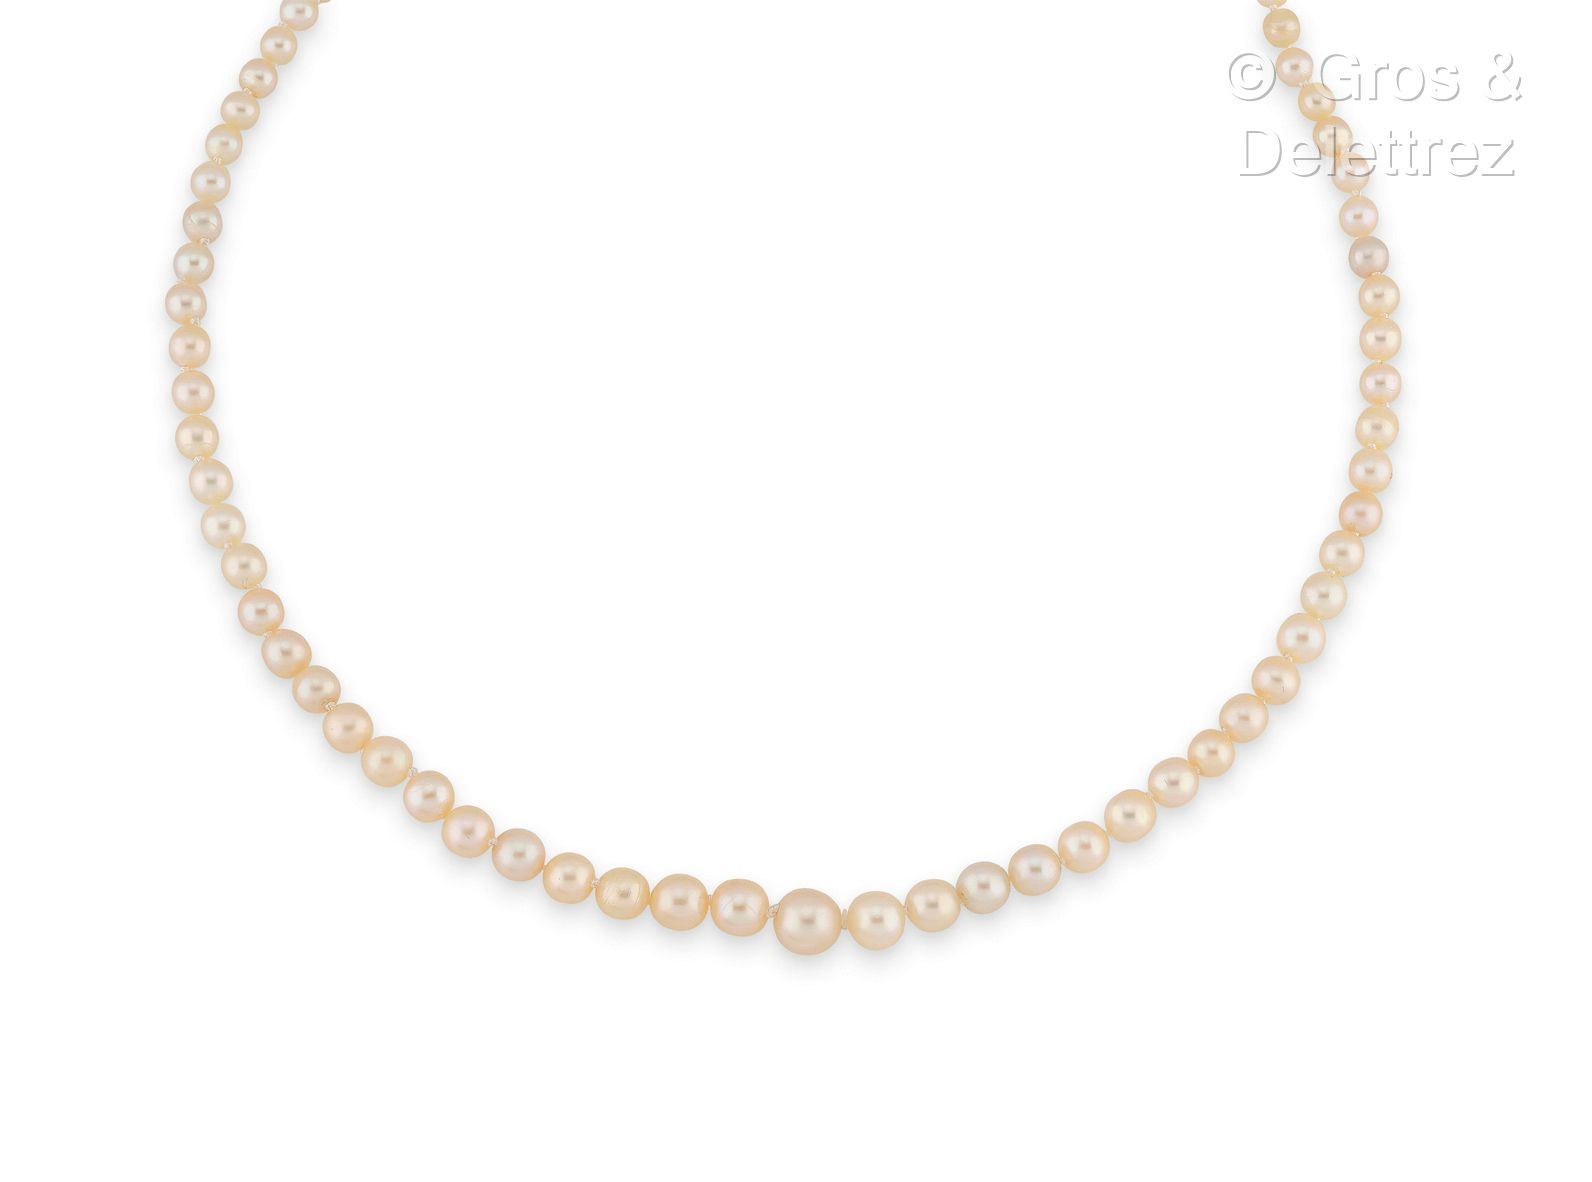 Null Necklace composed of a strand of fine pearls (86) and white cultured pearls&hellip;